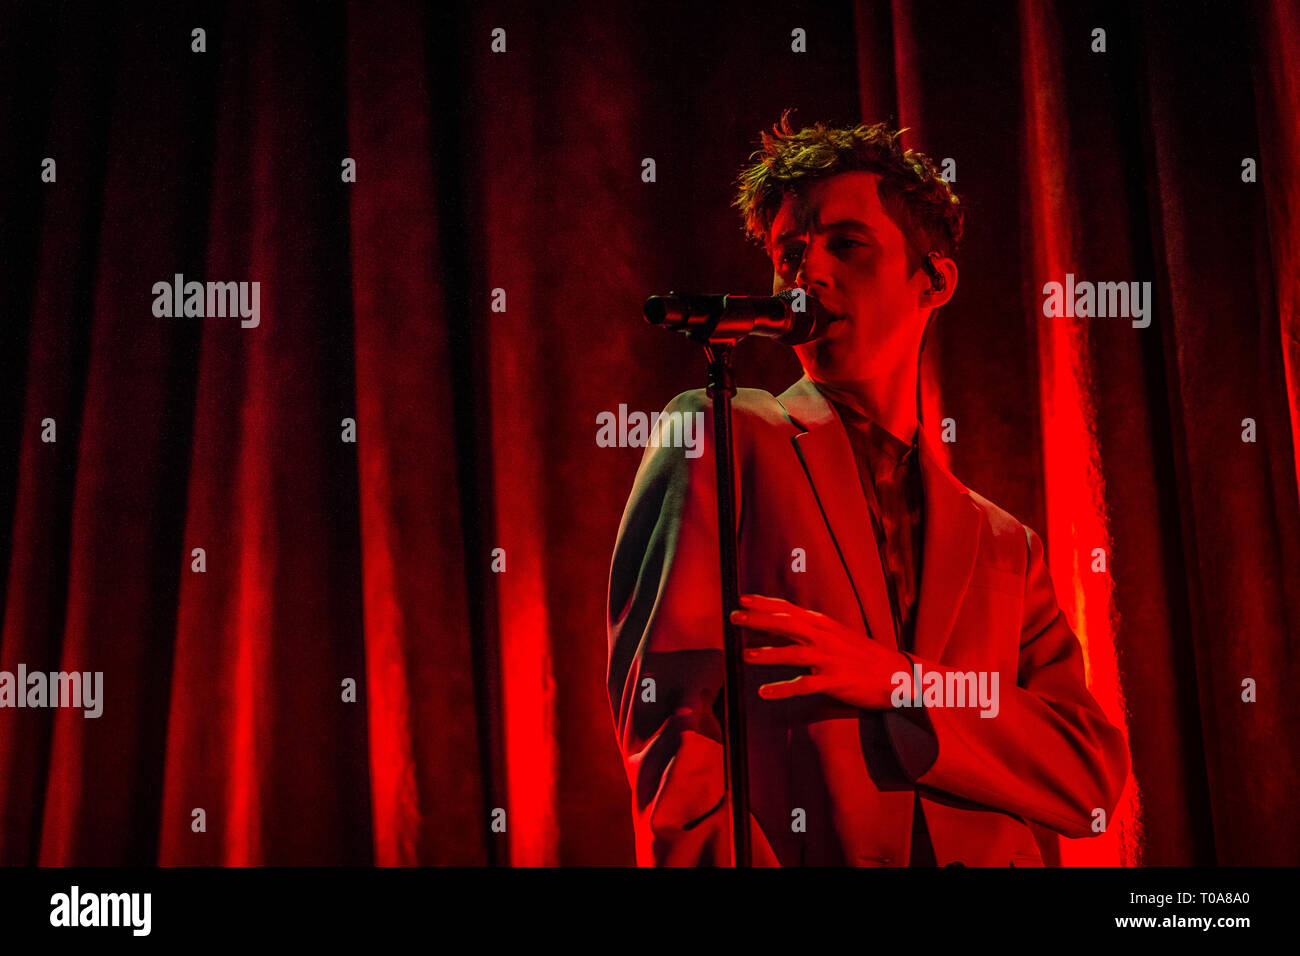 Copenhagen, Denmark. 18th Mar, 2019. Denmark, Roskilde - March 18, 2019. The South African-Australian singer, songwriter and actor Troye Sivan performs a live concert at Forum in Copenhagen. (Photo Credit: Gonzales Photo/Alamy Live News Stock Photo